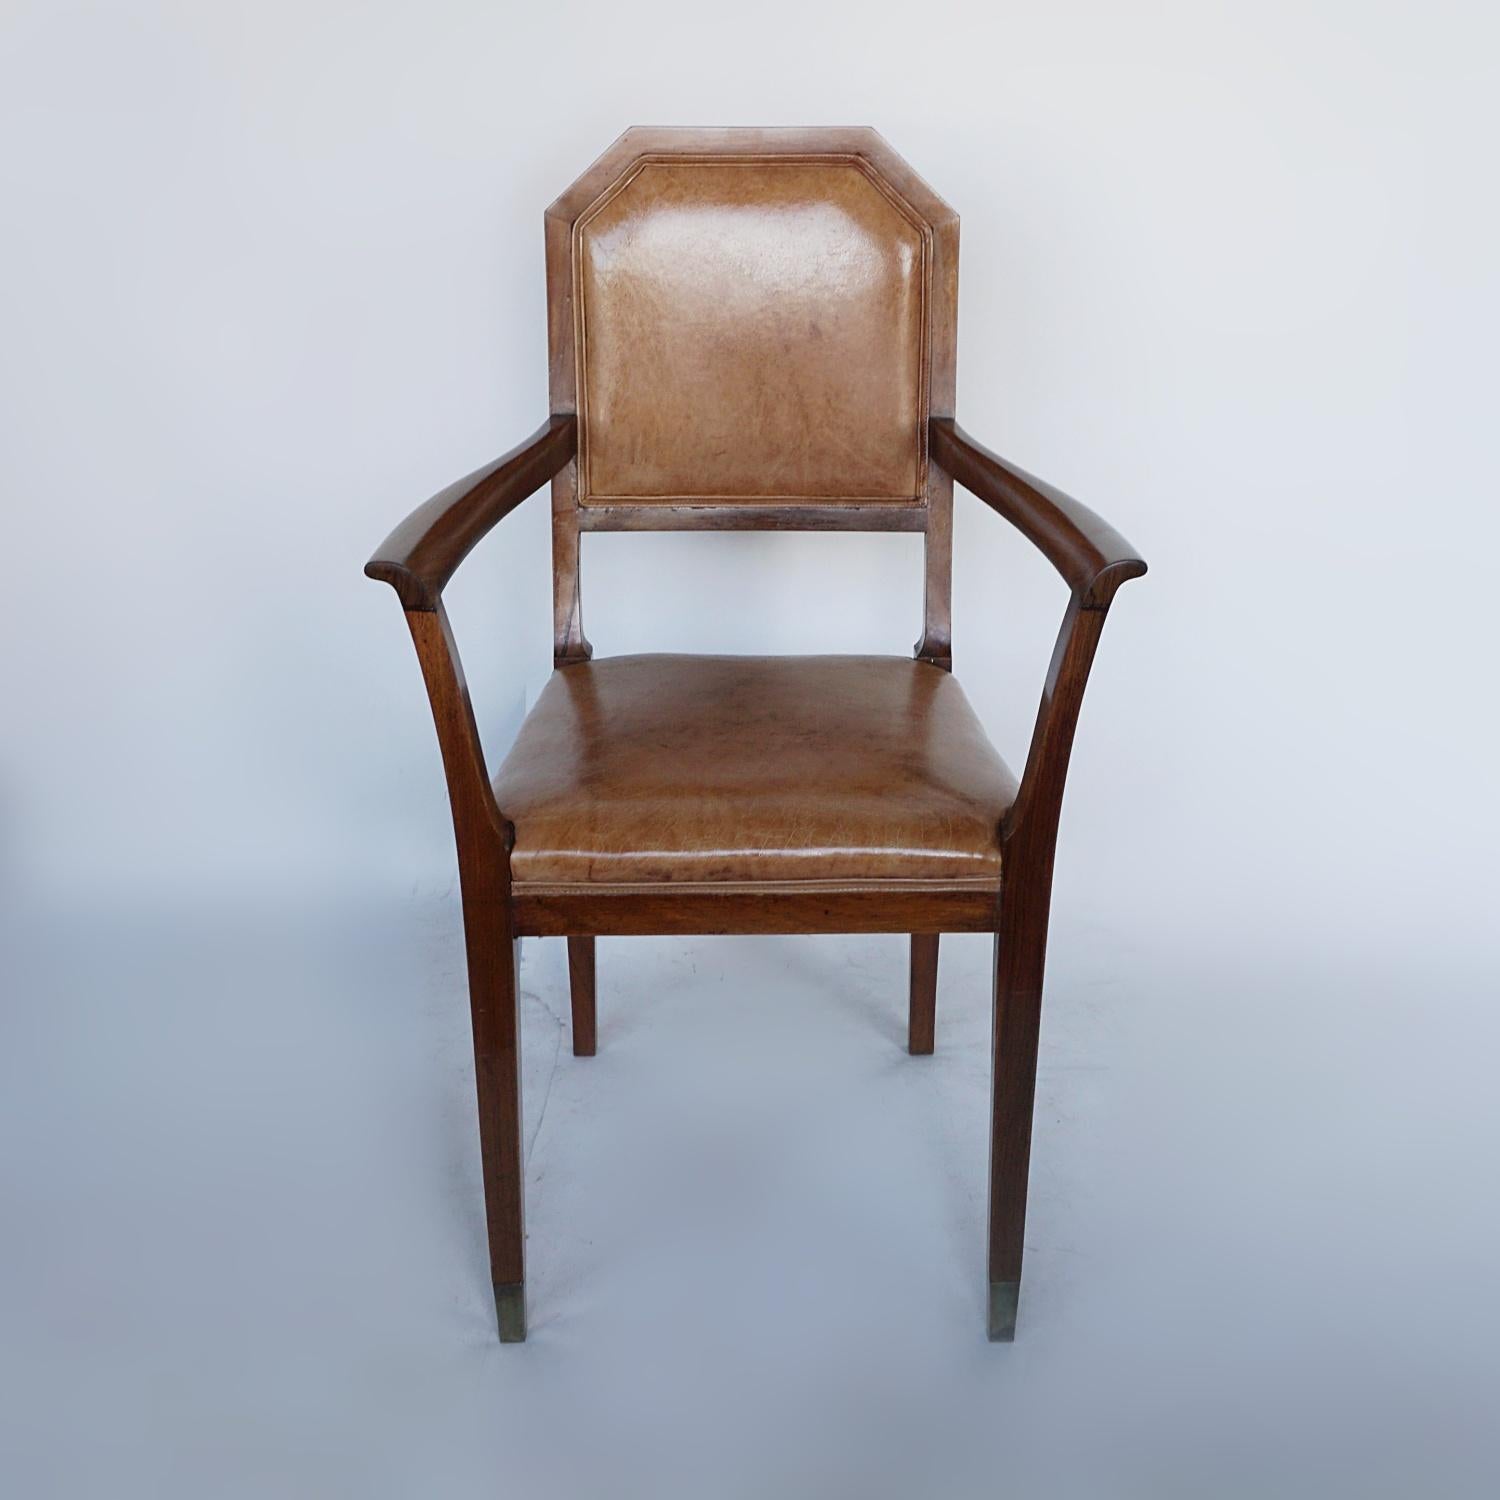 An Art Deco desk chair. Solid walnut, re-upholstered in brown leather. 

Dimensions: H 98cm, W 48cm, D 50cm.

Origin: French

Date: Circa 1925.

Item Number: 2704223.

All of our furniture is extensively polished and restored where